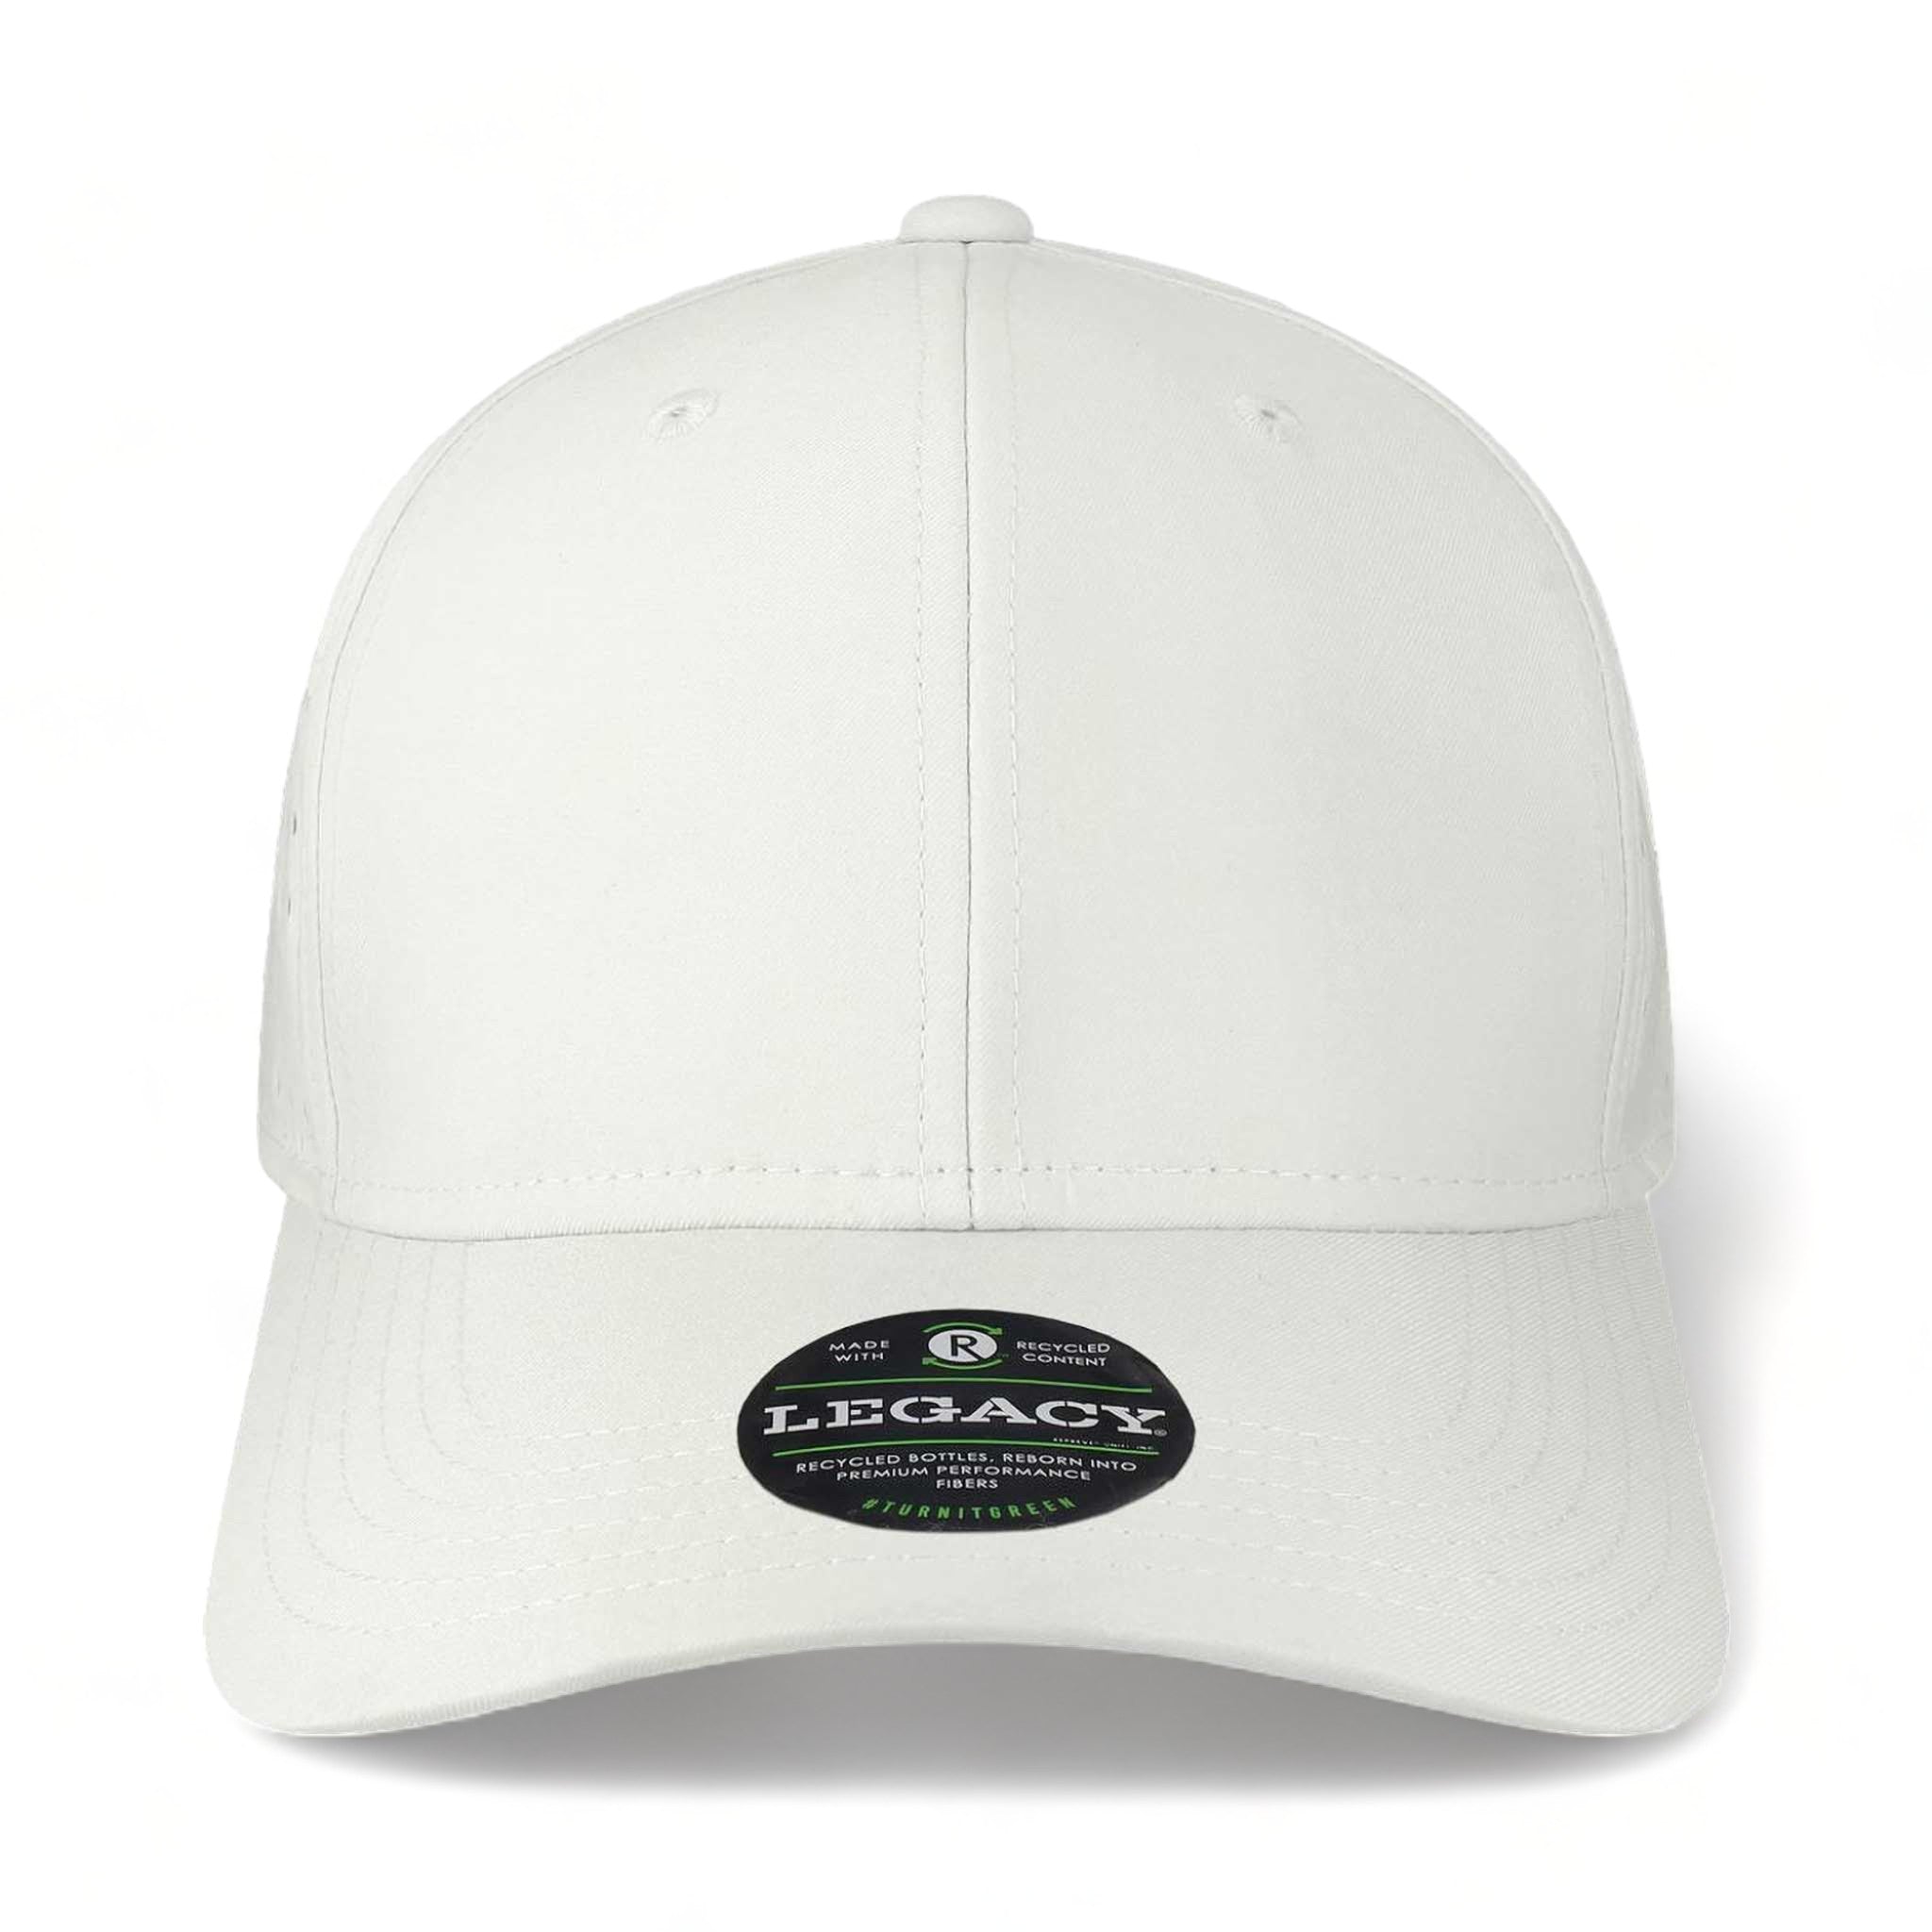 Front view of LEGACY REMPA custom hat in white